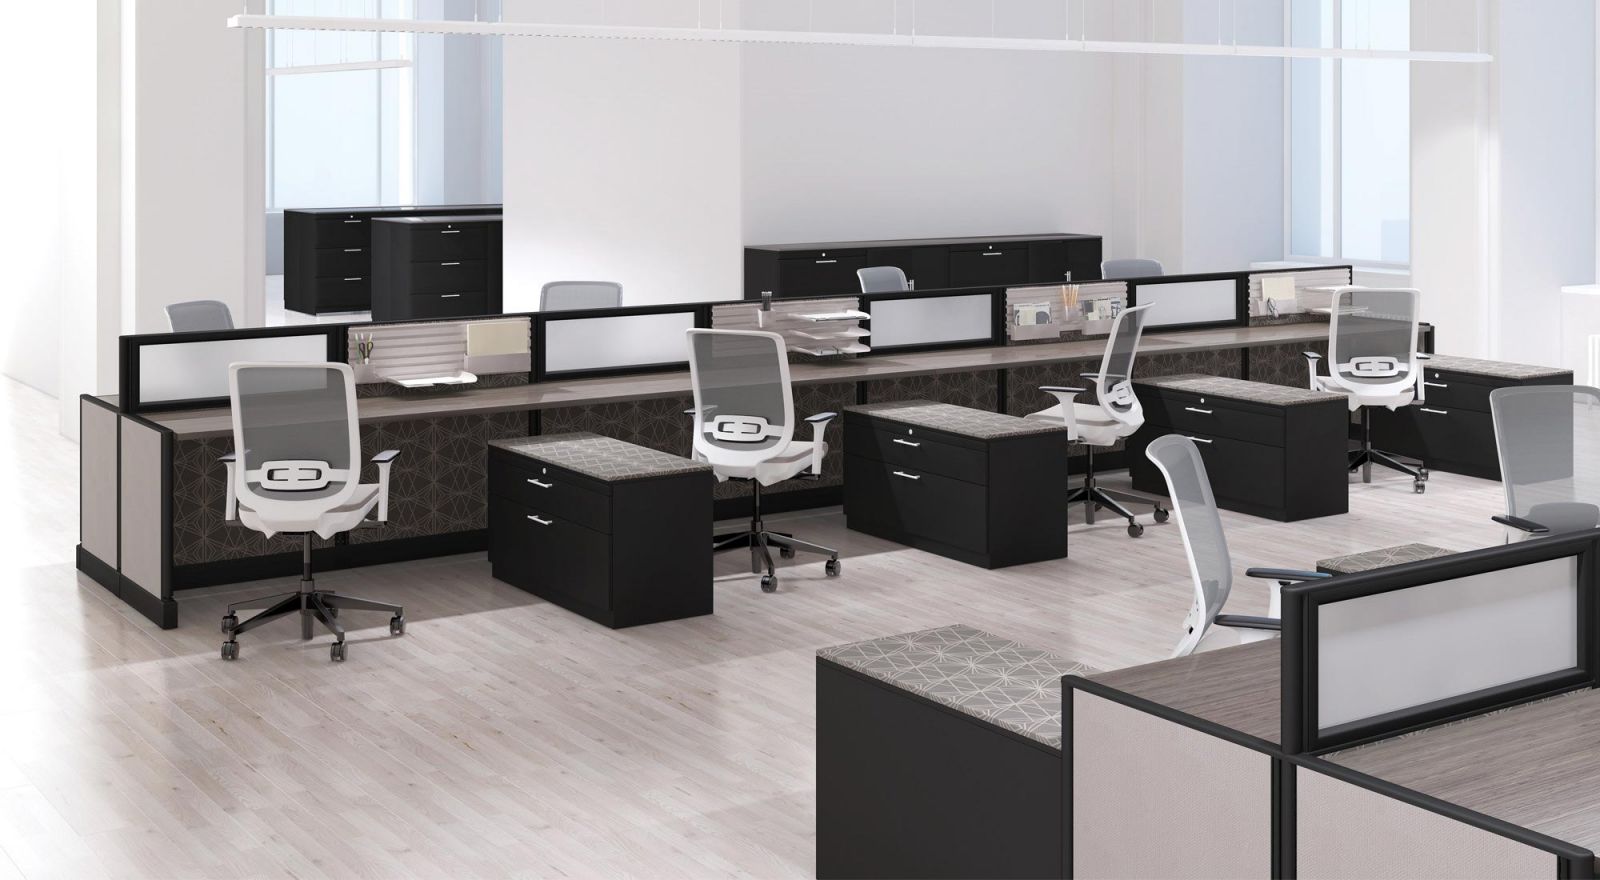 Knoll Cubicles as Benching